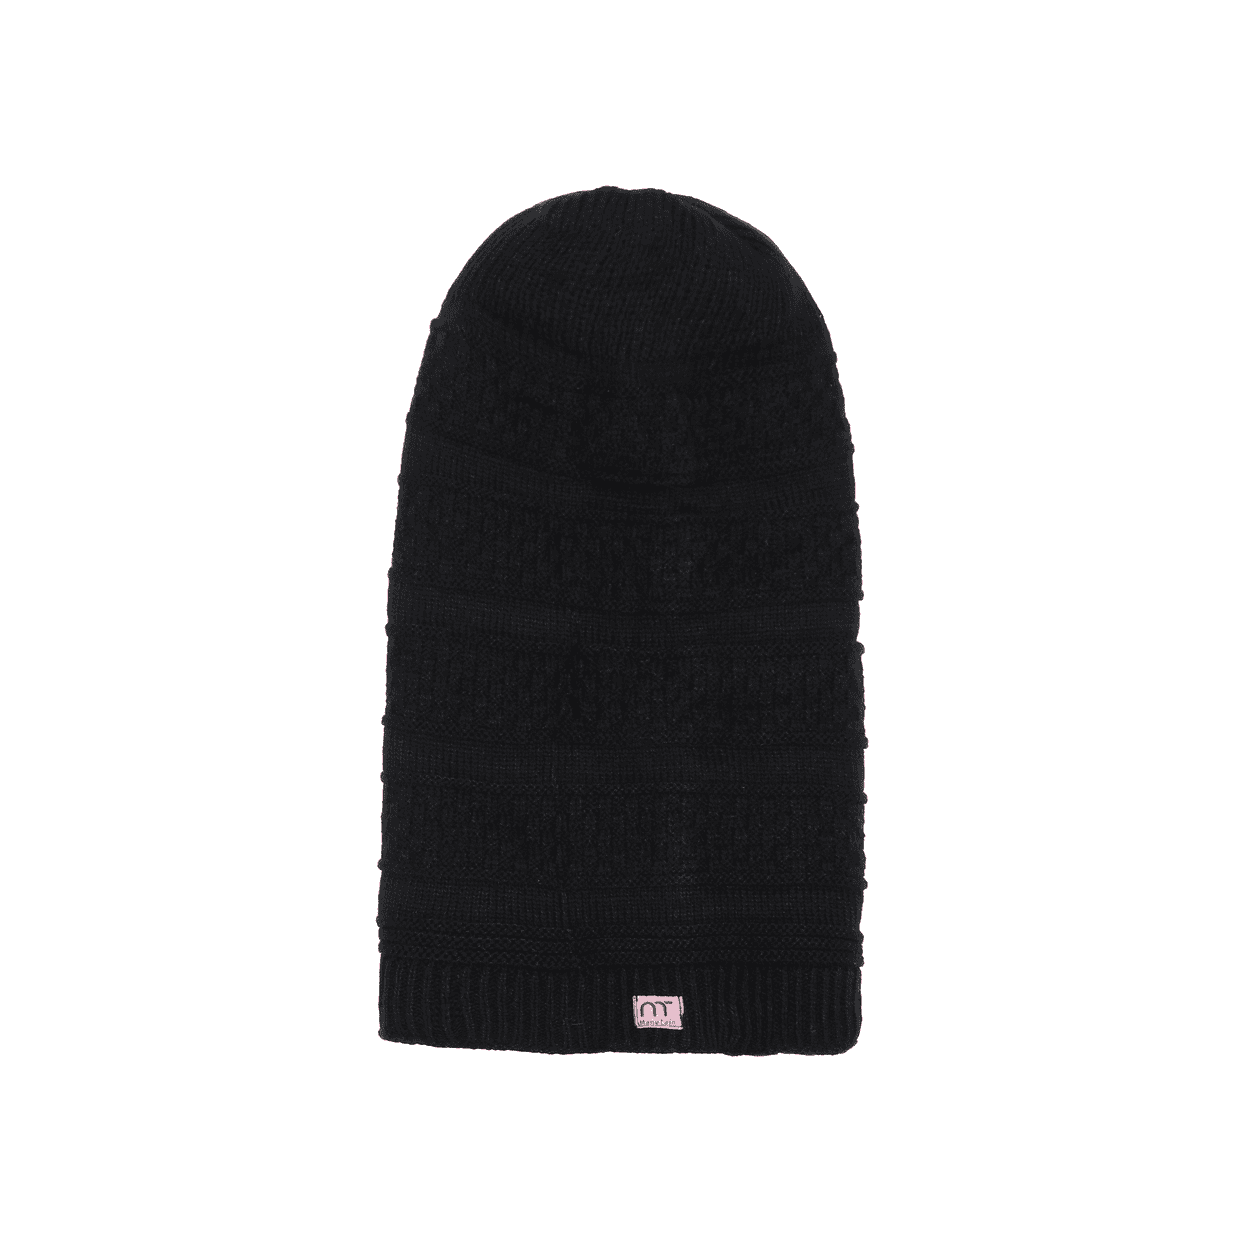 Satin Lined Beanie - Manetain Store